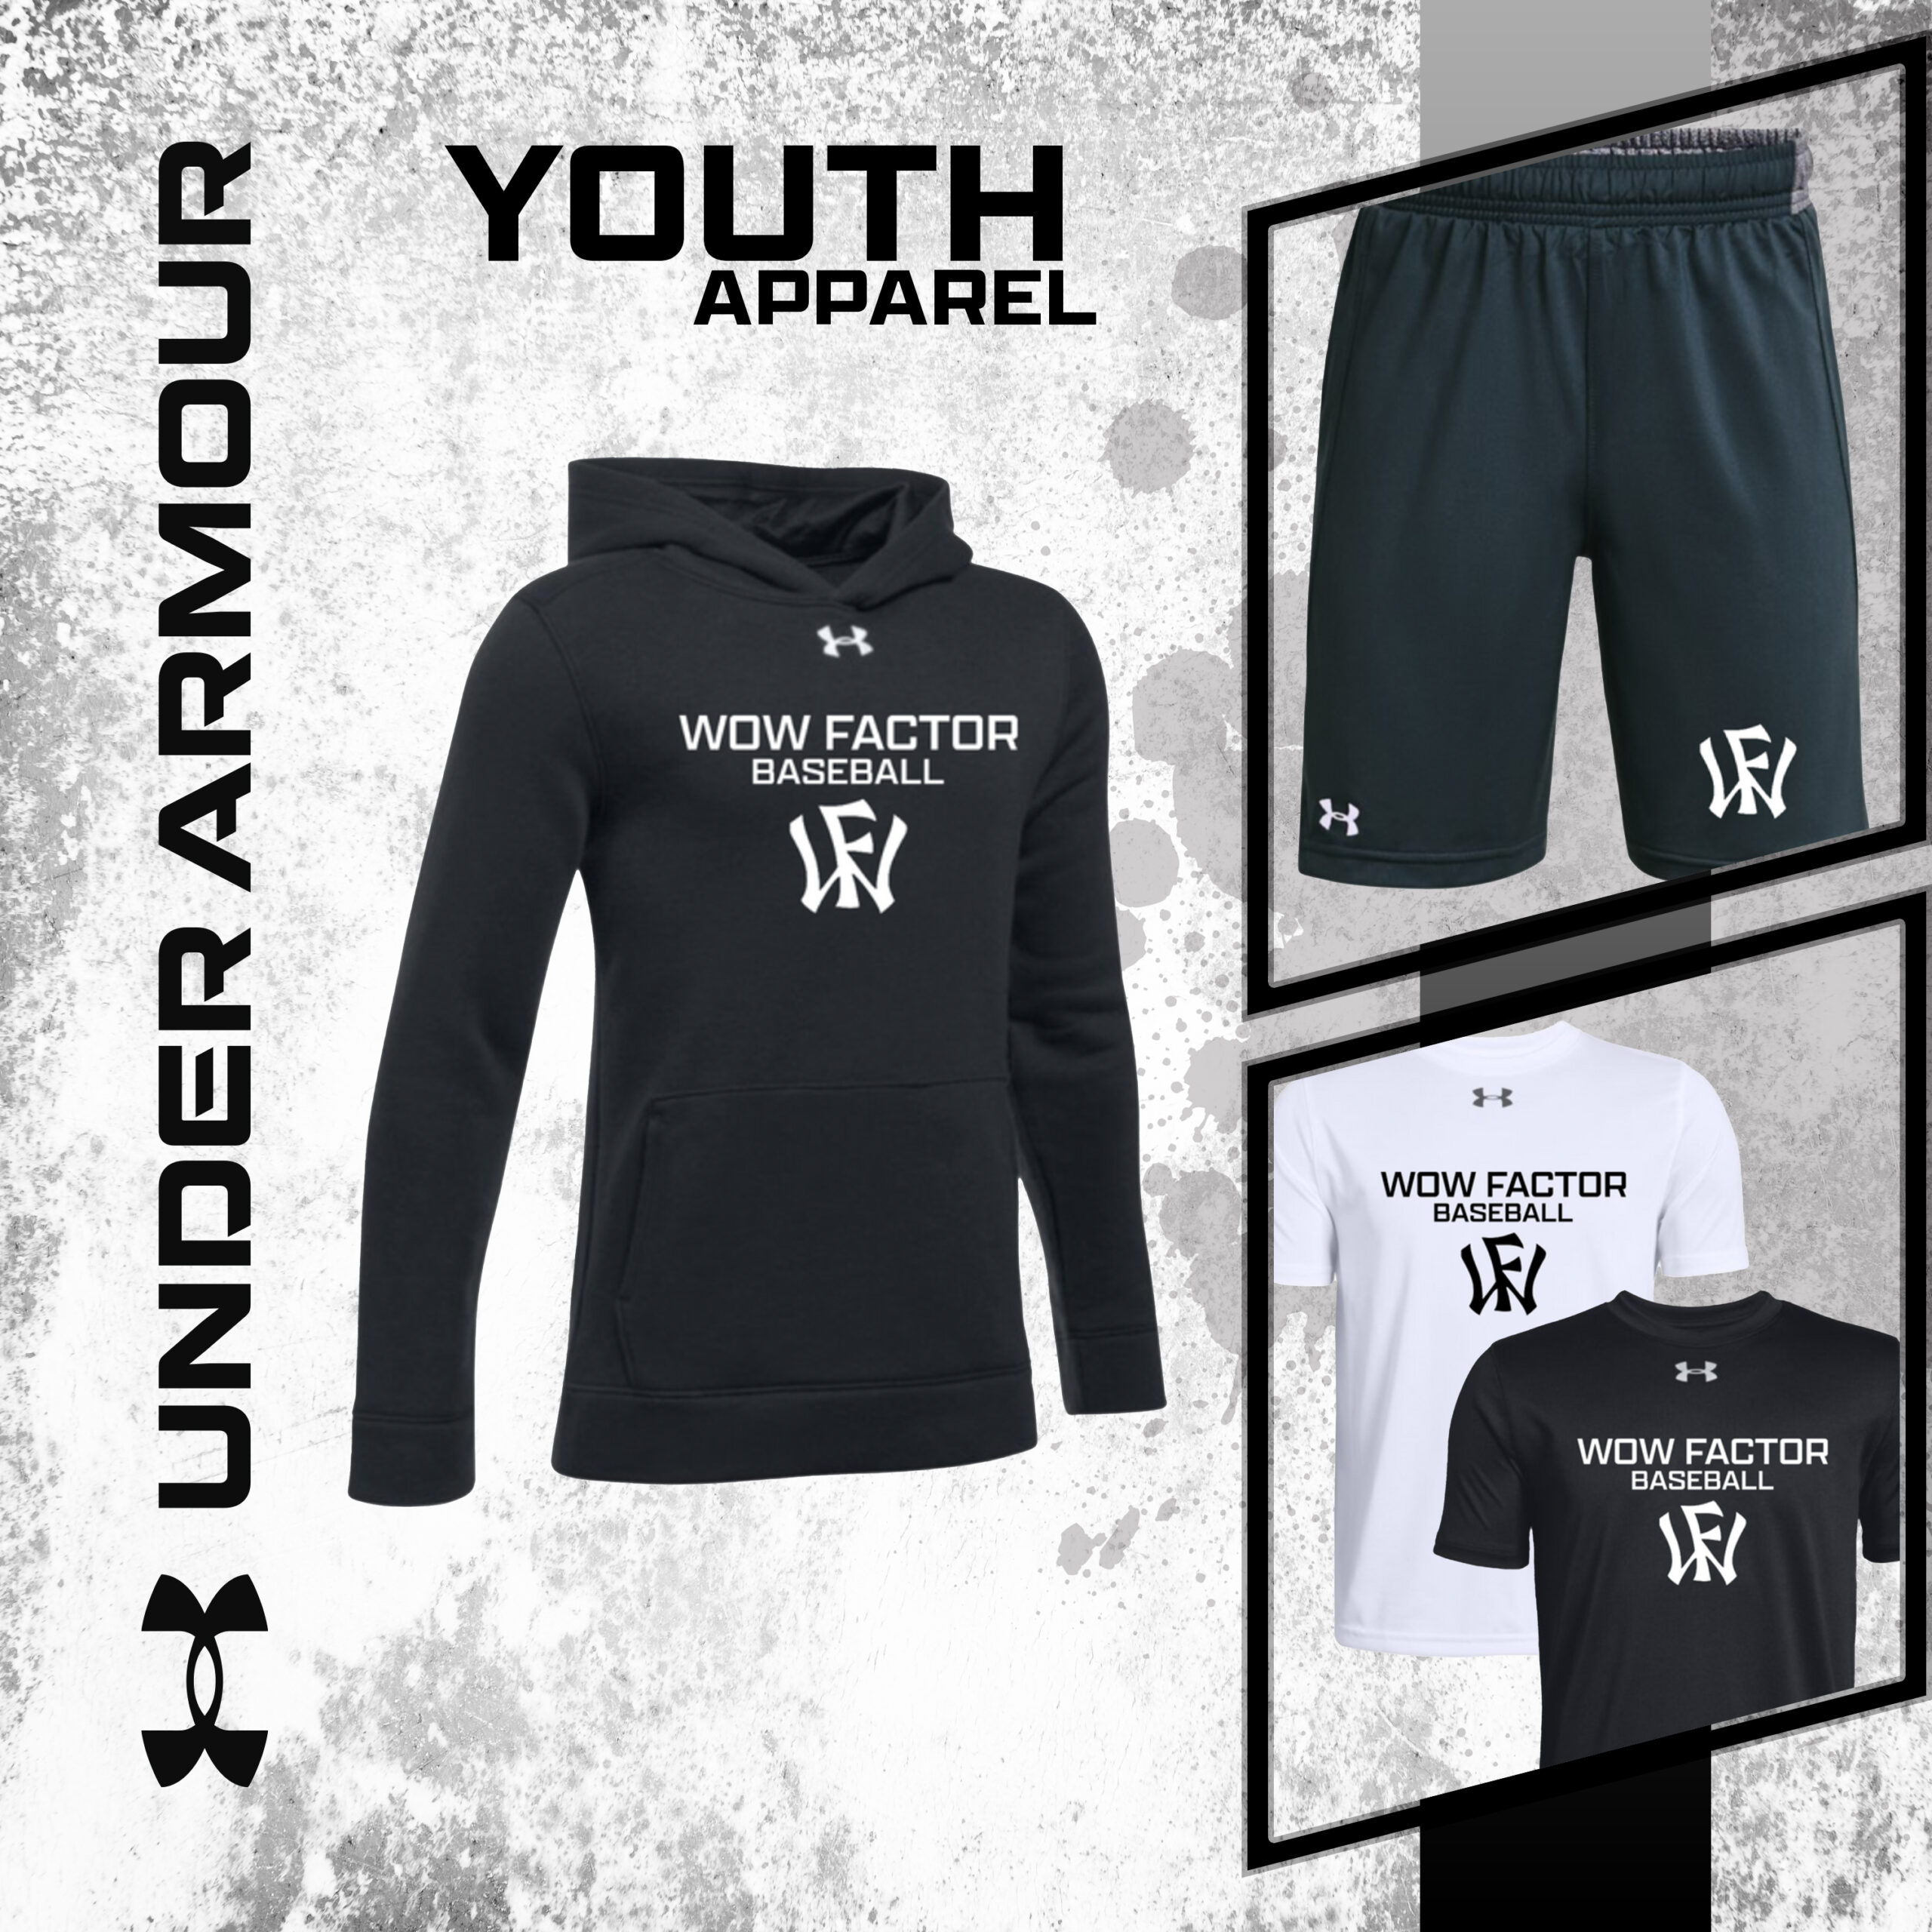 YOUTH APPAREL